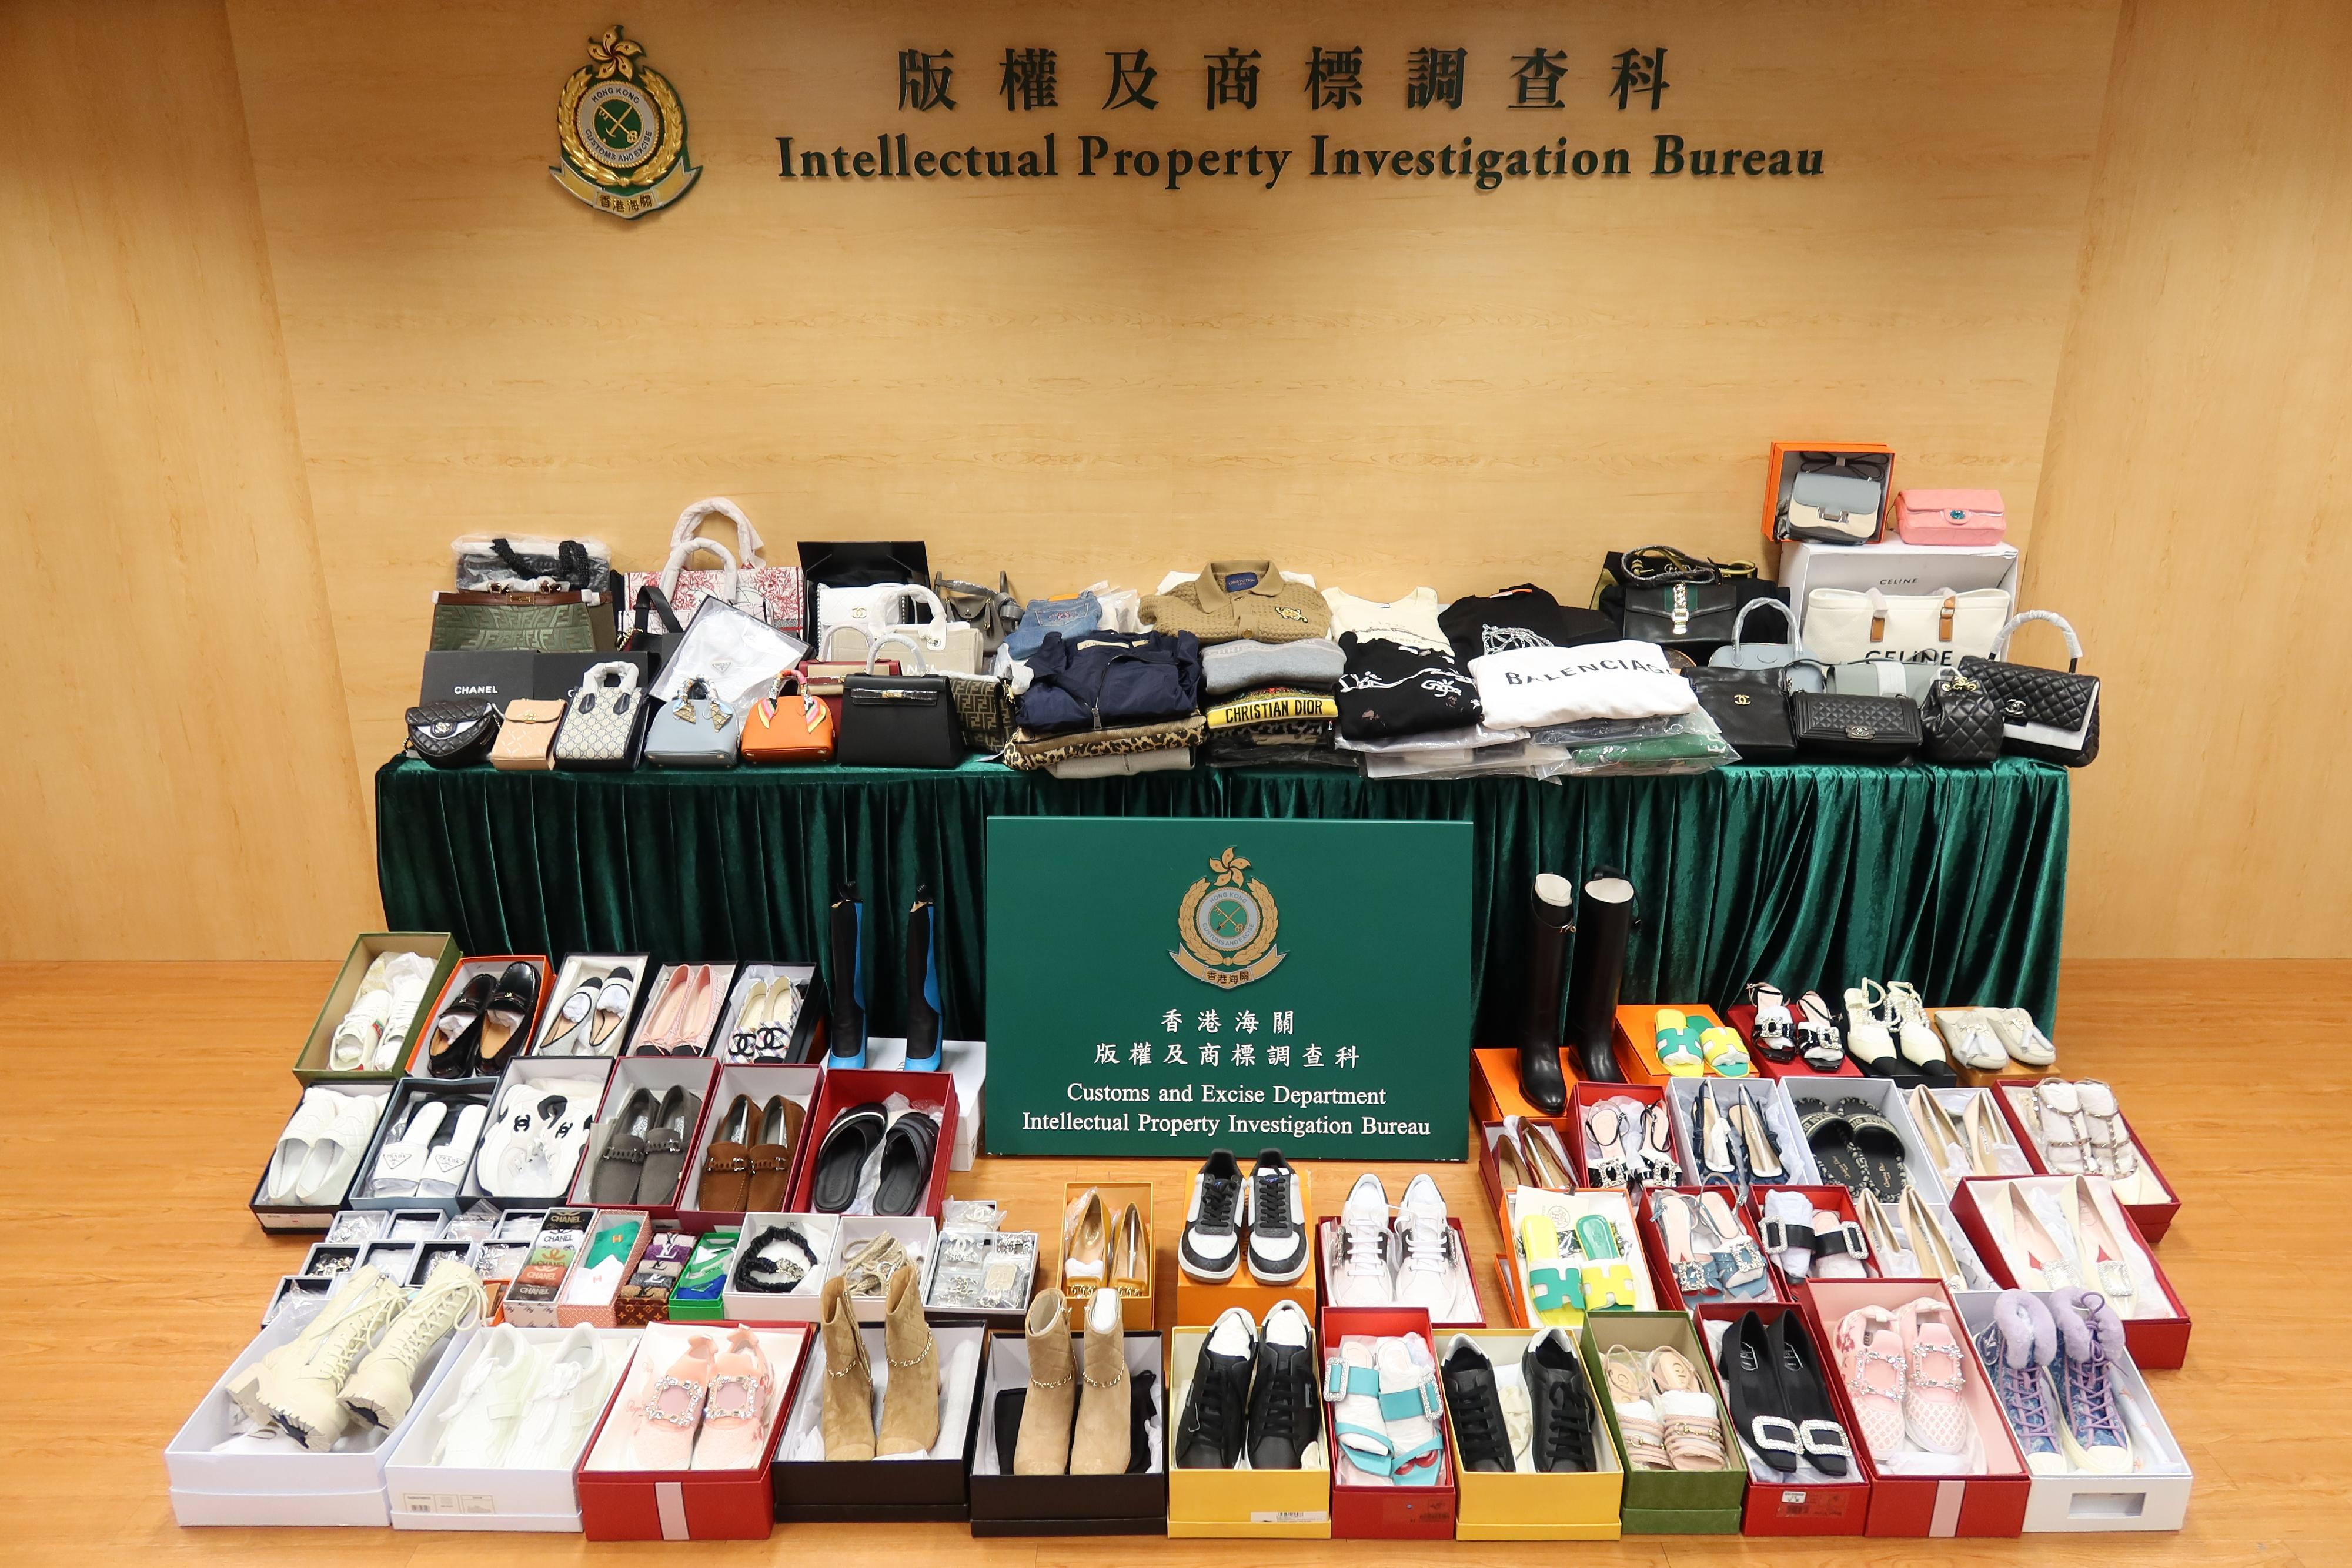 Hong Kong Customs today (August 10) conducted a special enforcement operation to combat the sale of counterfeit goods and seized about 1 000 items of suspected counterfeit goods of famous brands with an estimated market value of about $1.5 million. Photo shows some of the suspected counterfeit goods of famous brands seized.